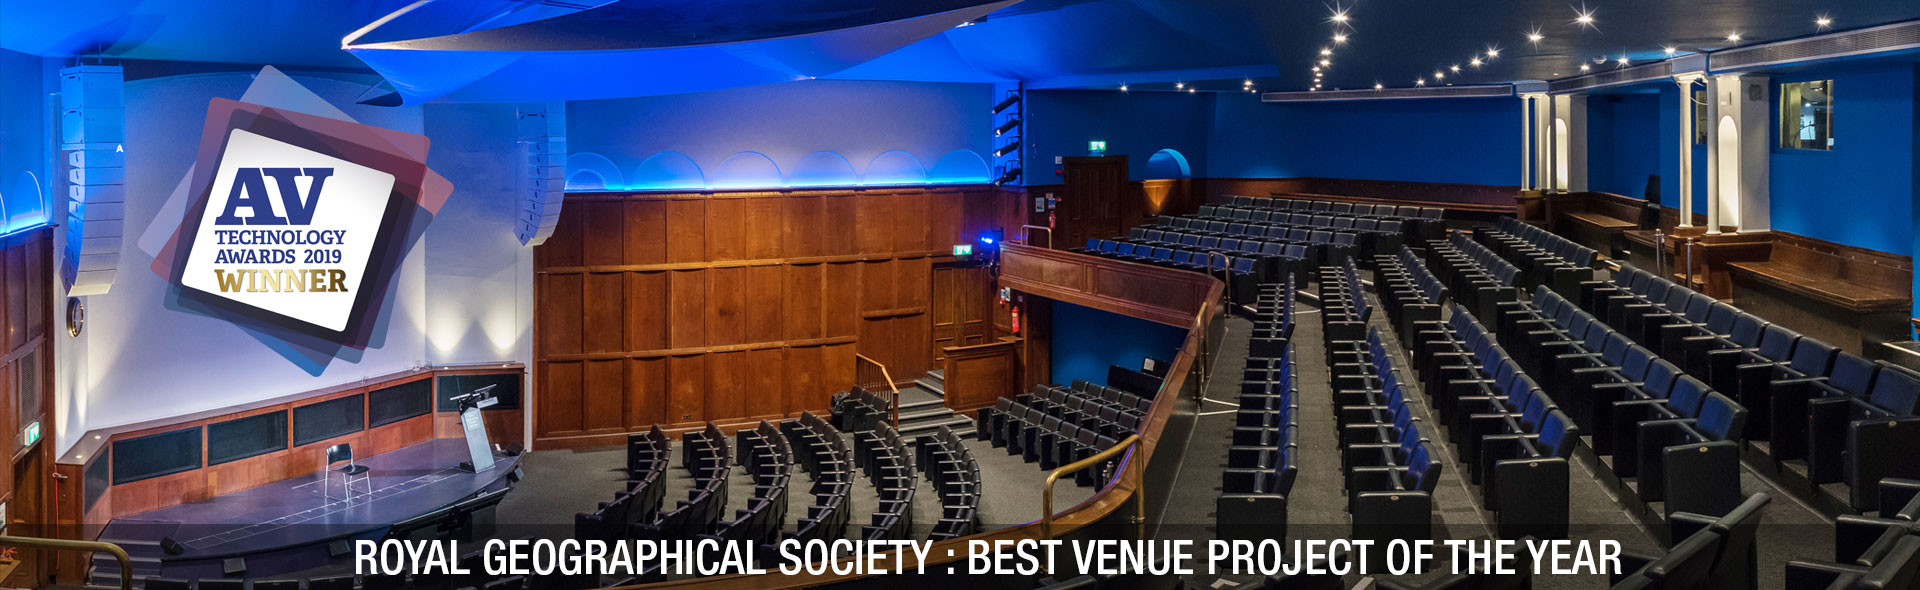 APG wins Best Venue Projet of the year at the AV Technology Awards 2019!